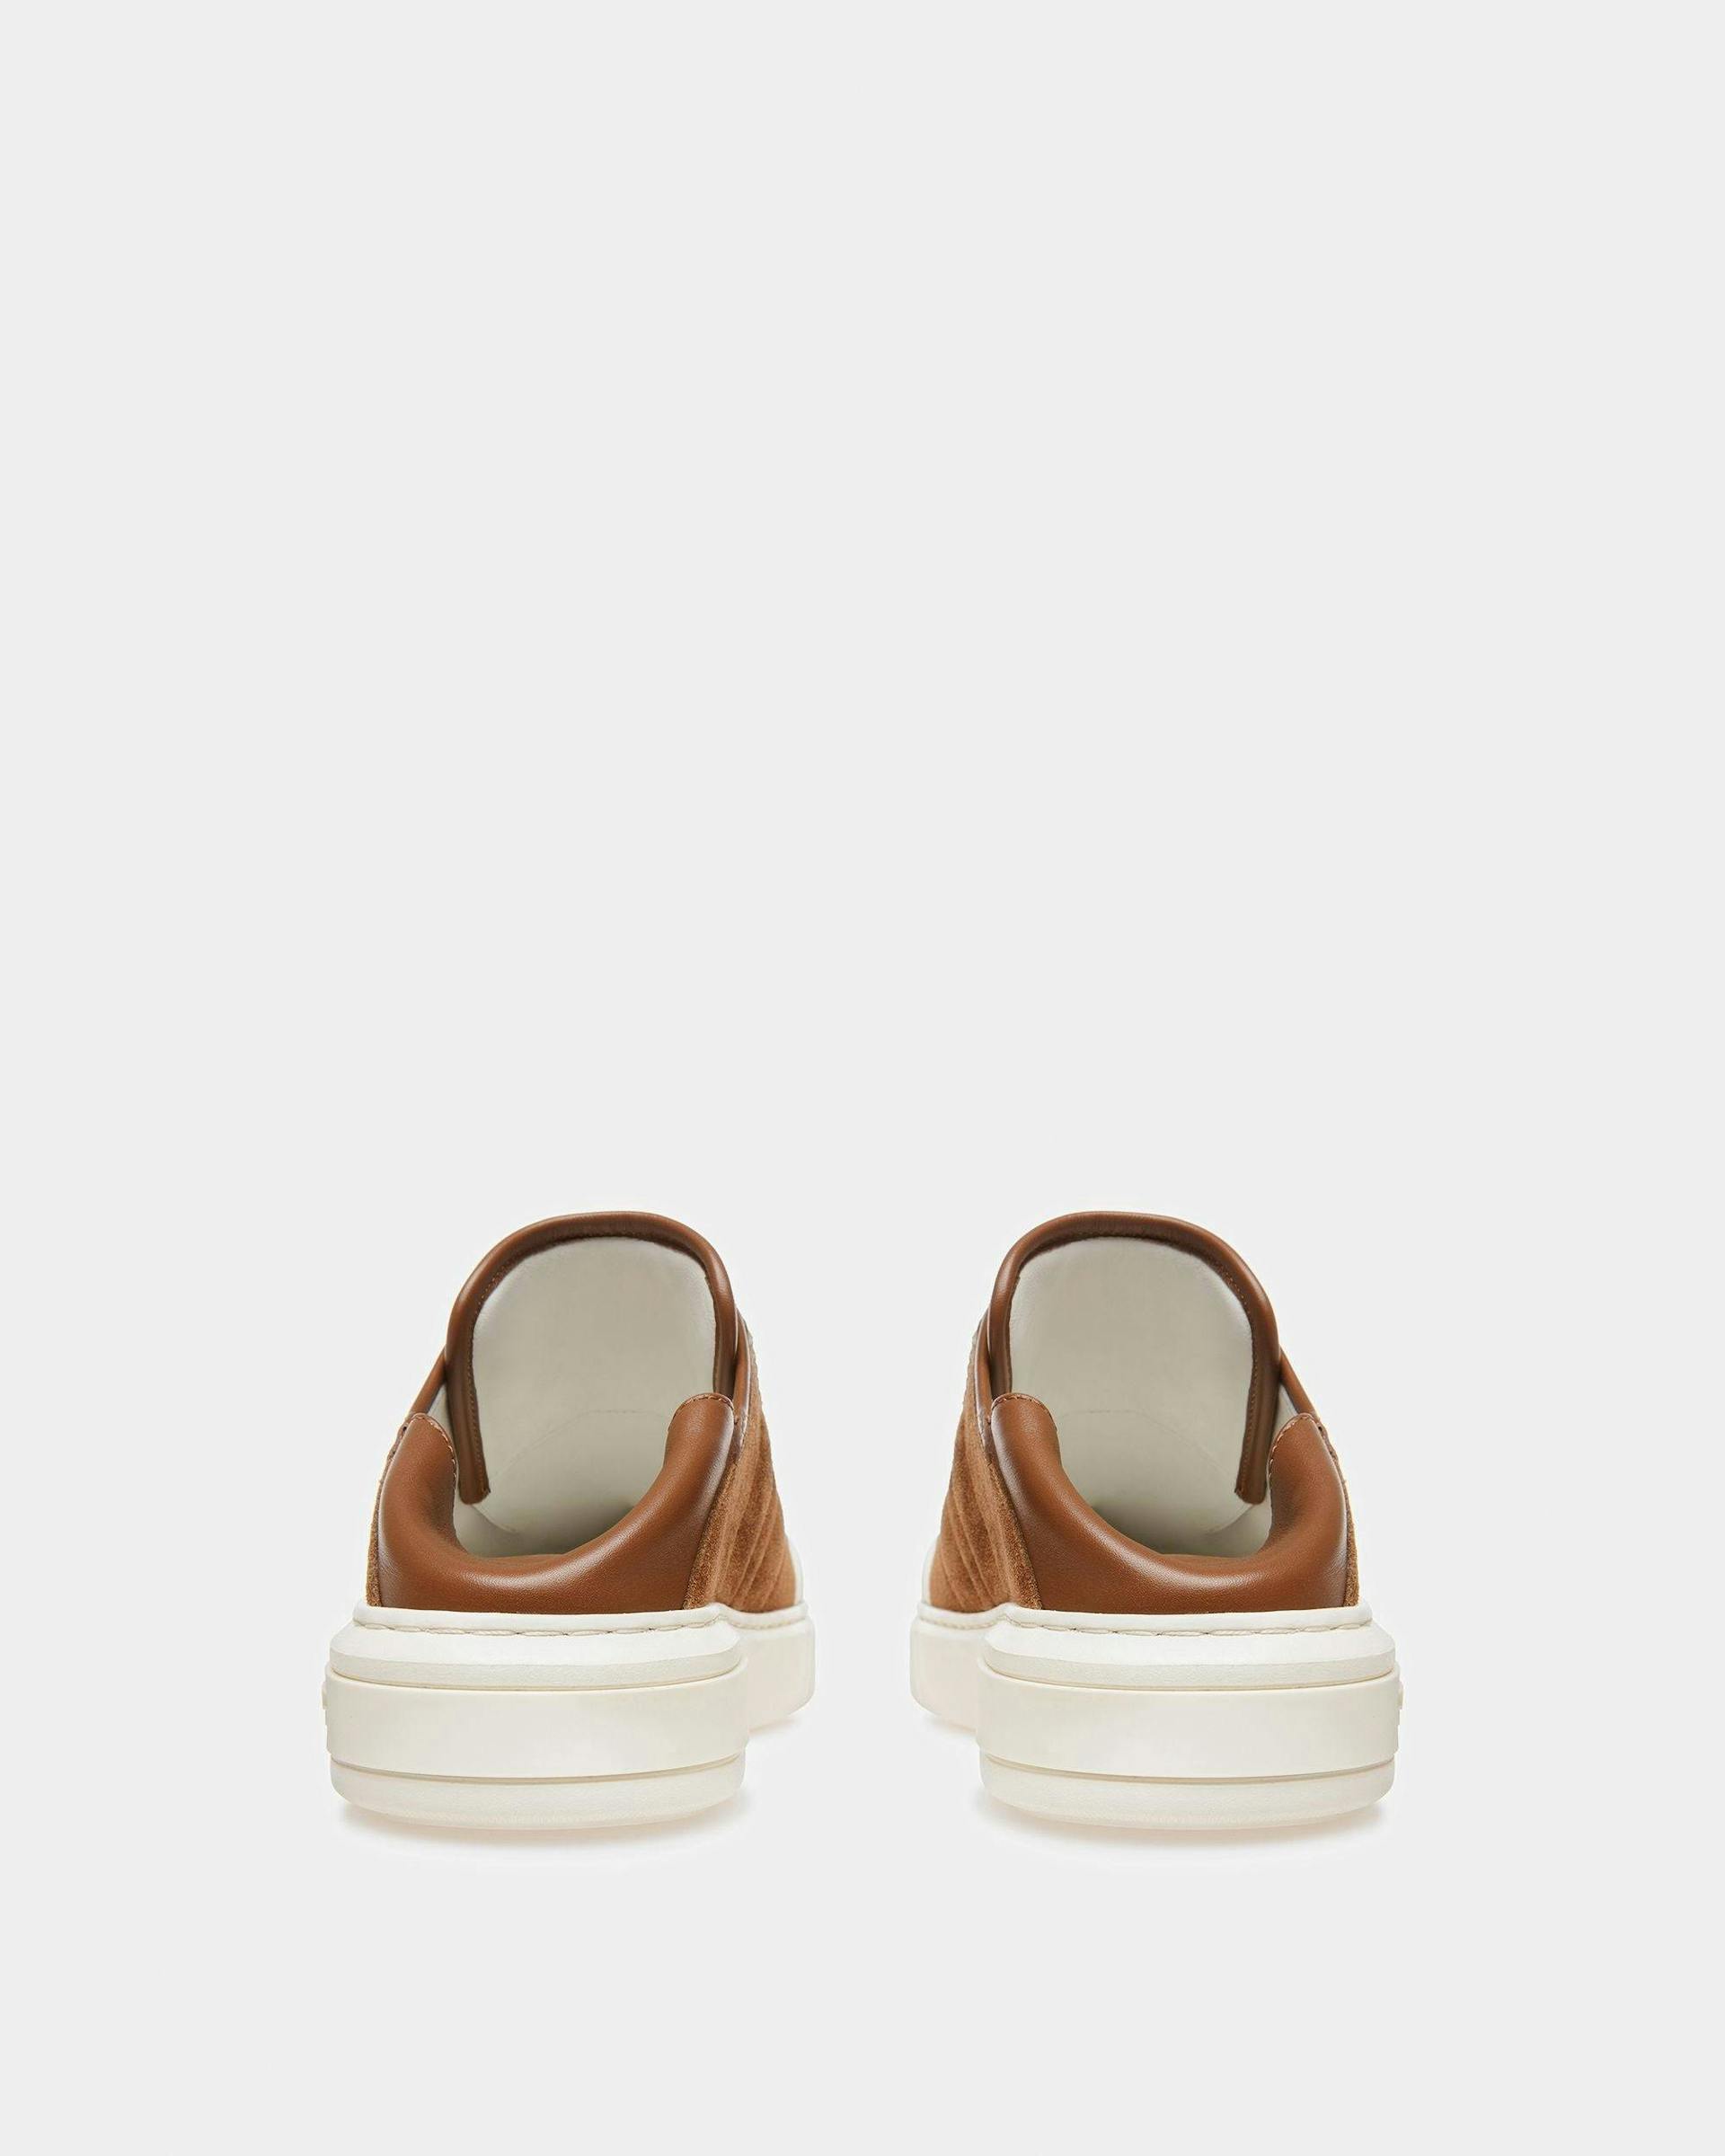 Marily Suede Sneakers In Brown - Women's - Bally - 09